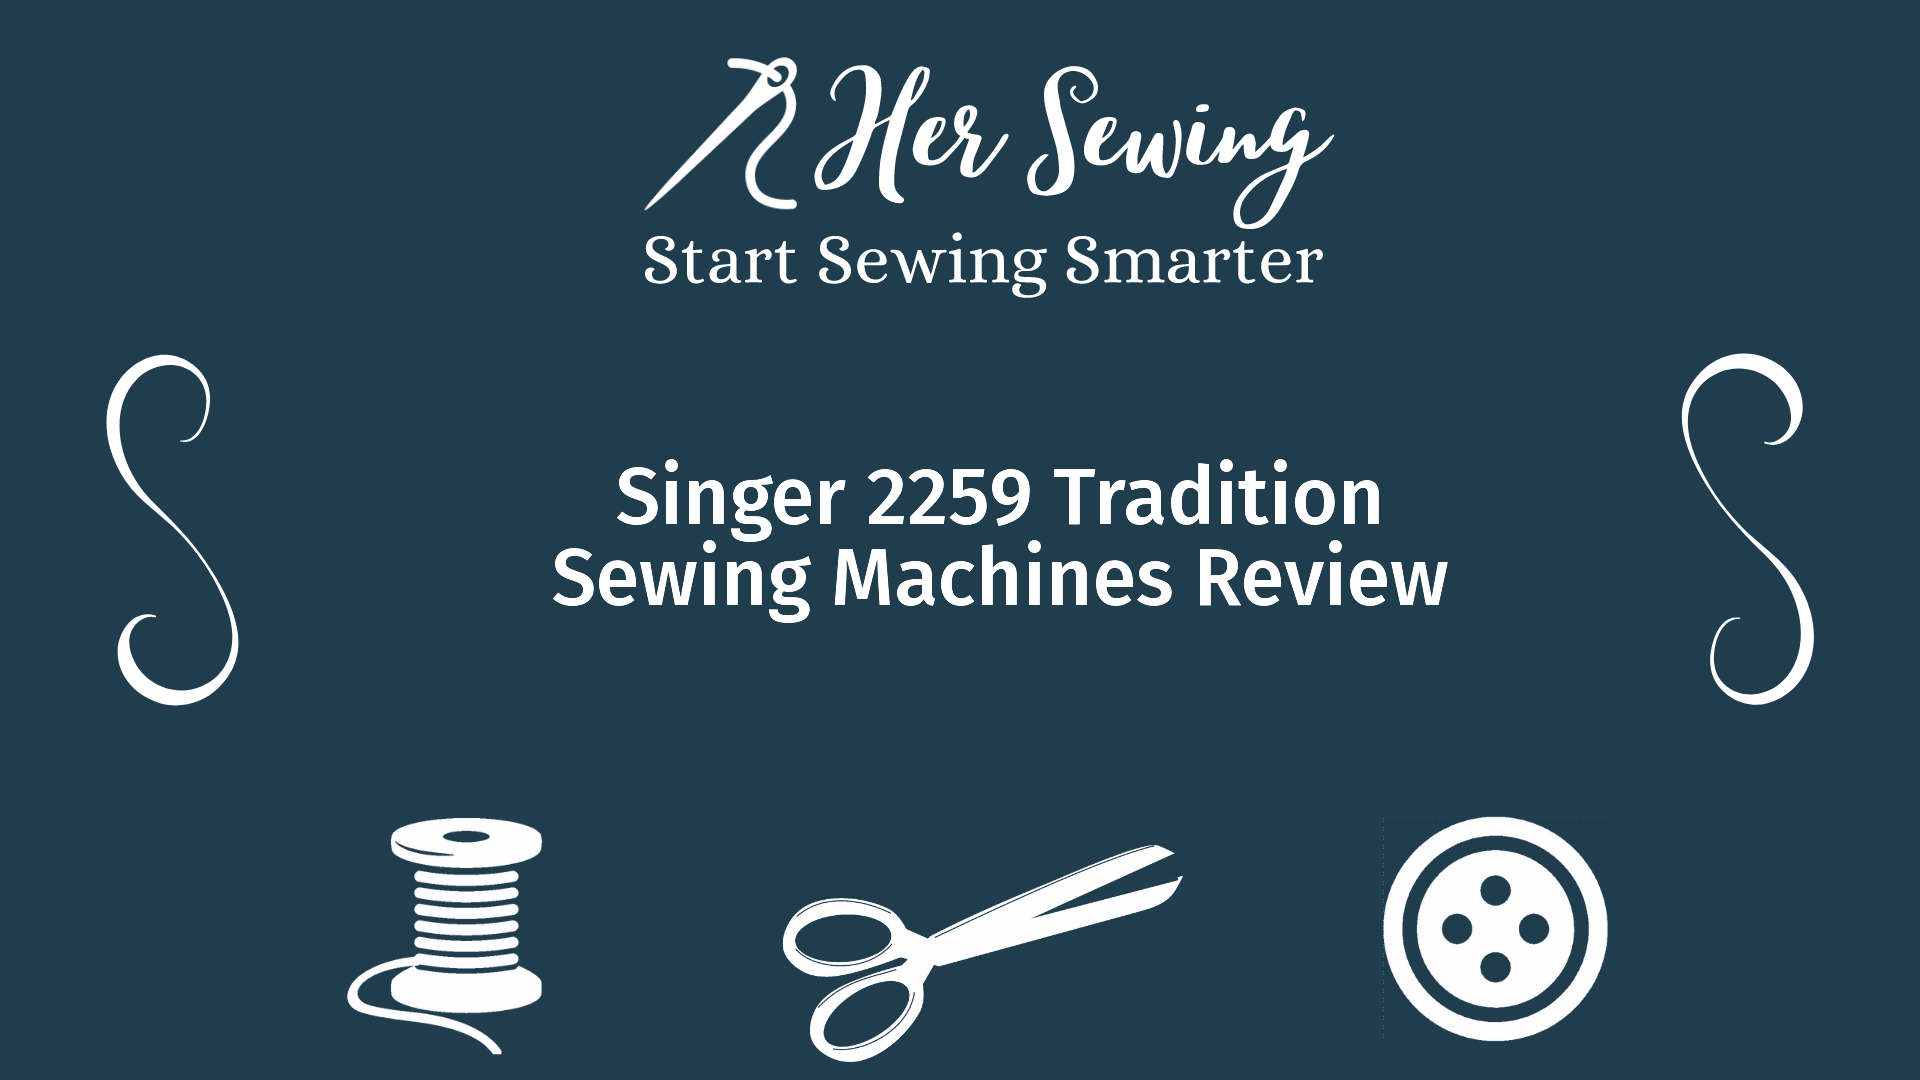 Singer 2259 Tradition Sewing Machines Review